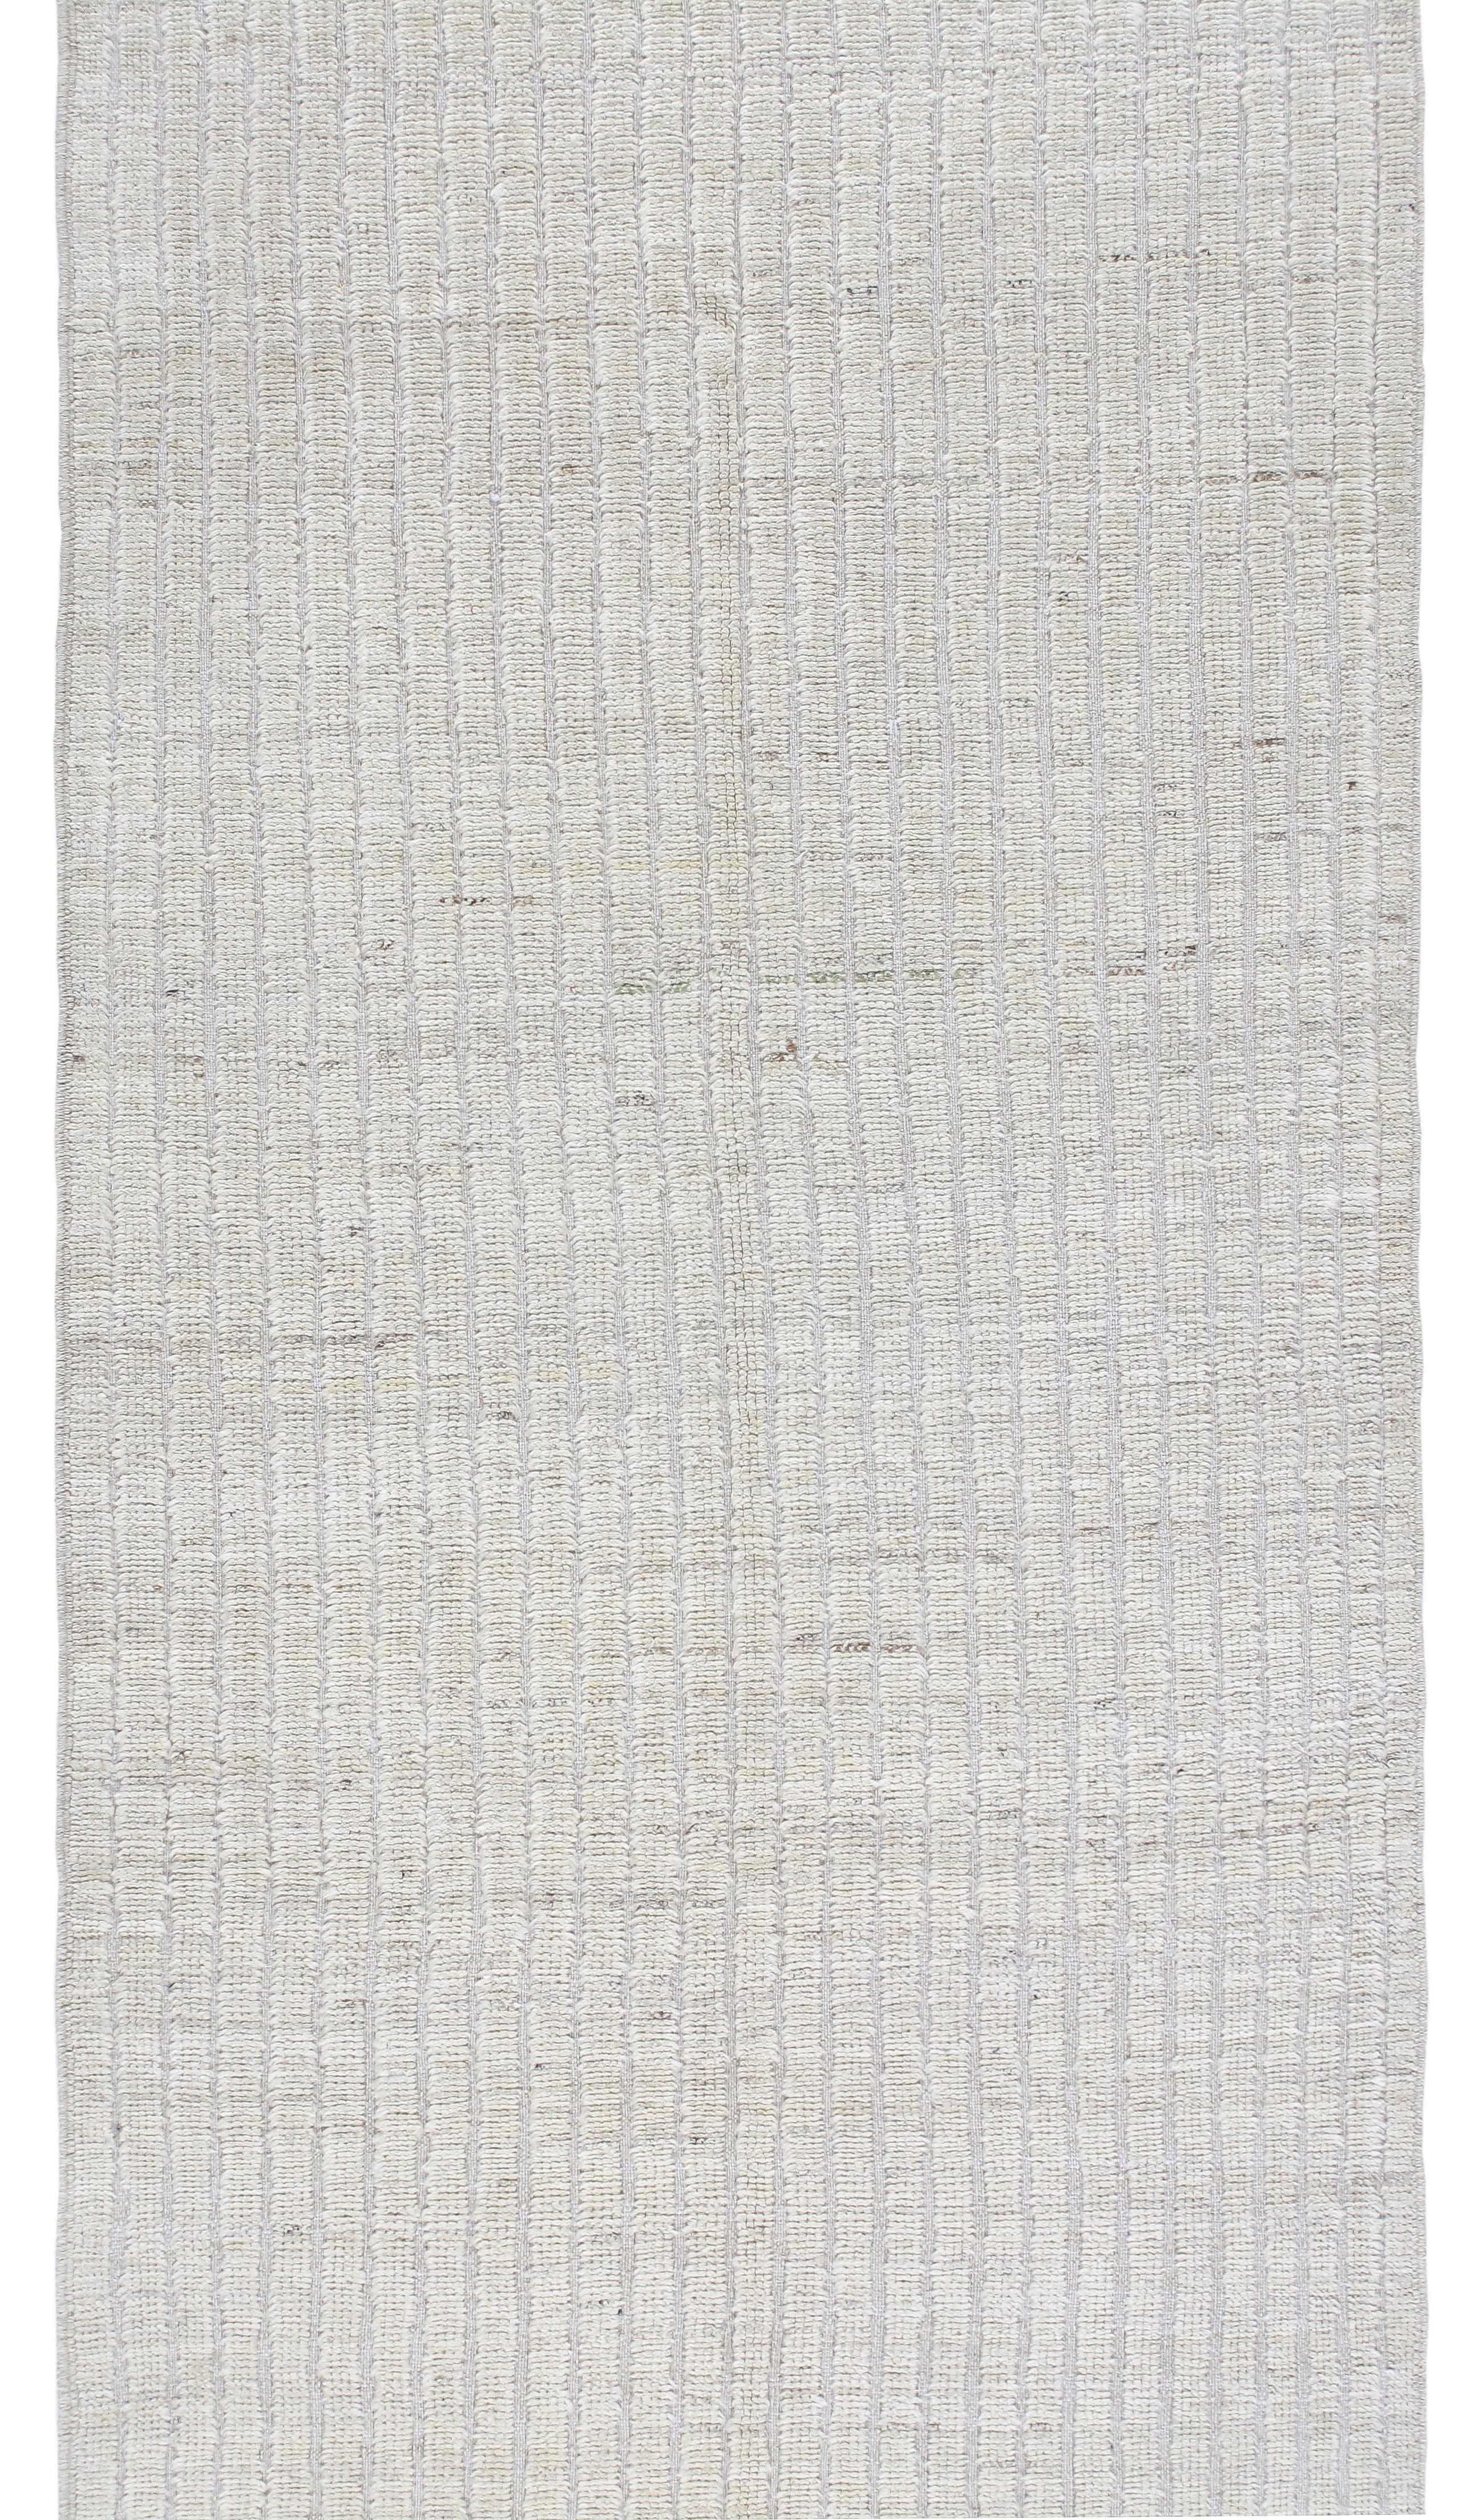 Our African runner is hand-knotted from the finest hand-carded, hand-spun, naturally dyed wool. This unique modern design was created using an ancient hand-knotting technique that involves skilled artisans tying individual knots onto the warp thread